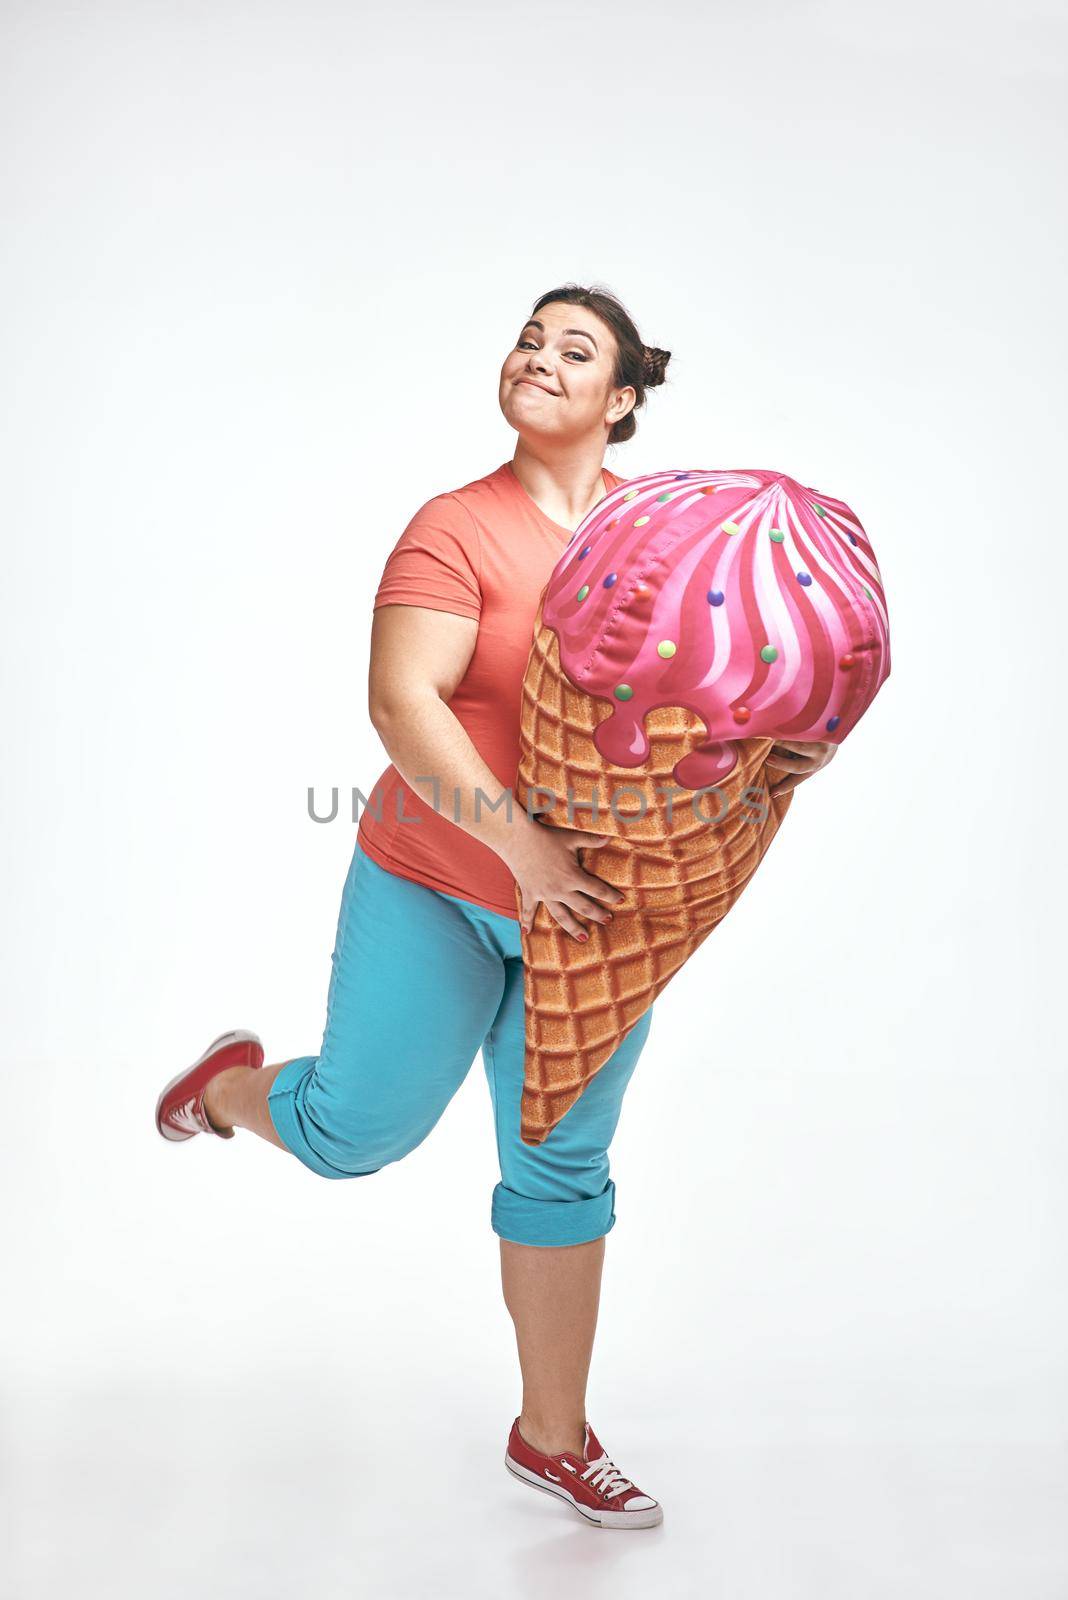 Funny picture of amusing, brunette, chubby woman on white background. Woman is holding a huge ice cream